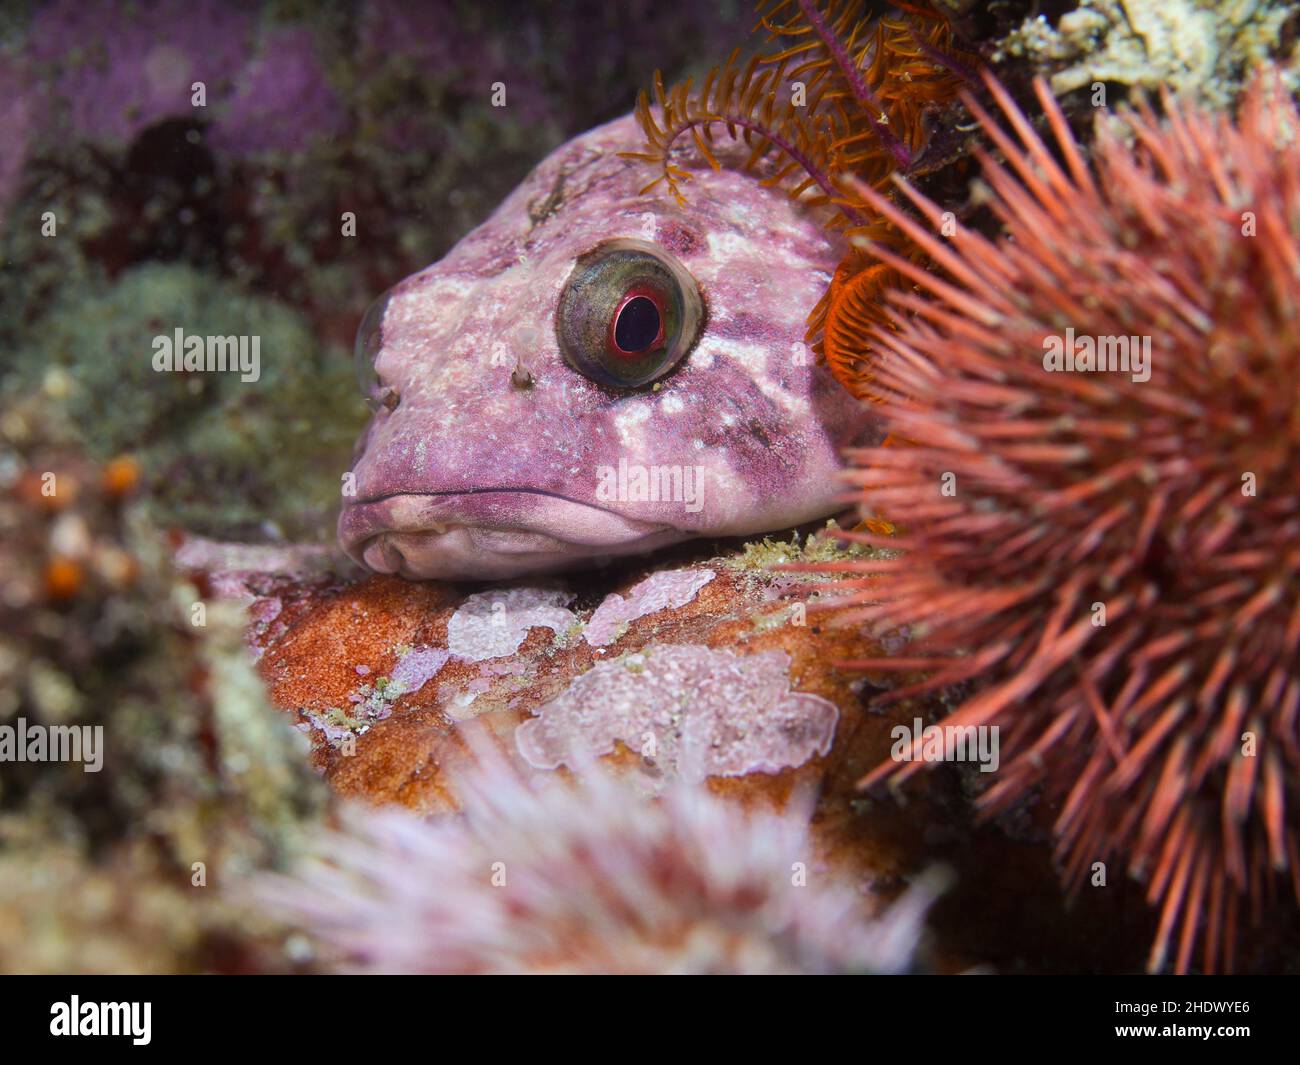 Rocksucker or giant clingfish (Chorisochismus dentex) hiding behind some sea urchins with pale pink coloration. Stock Photo